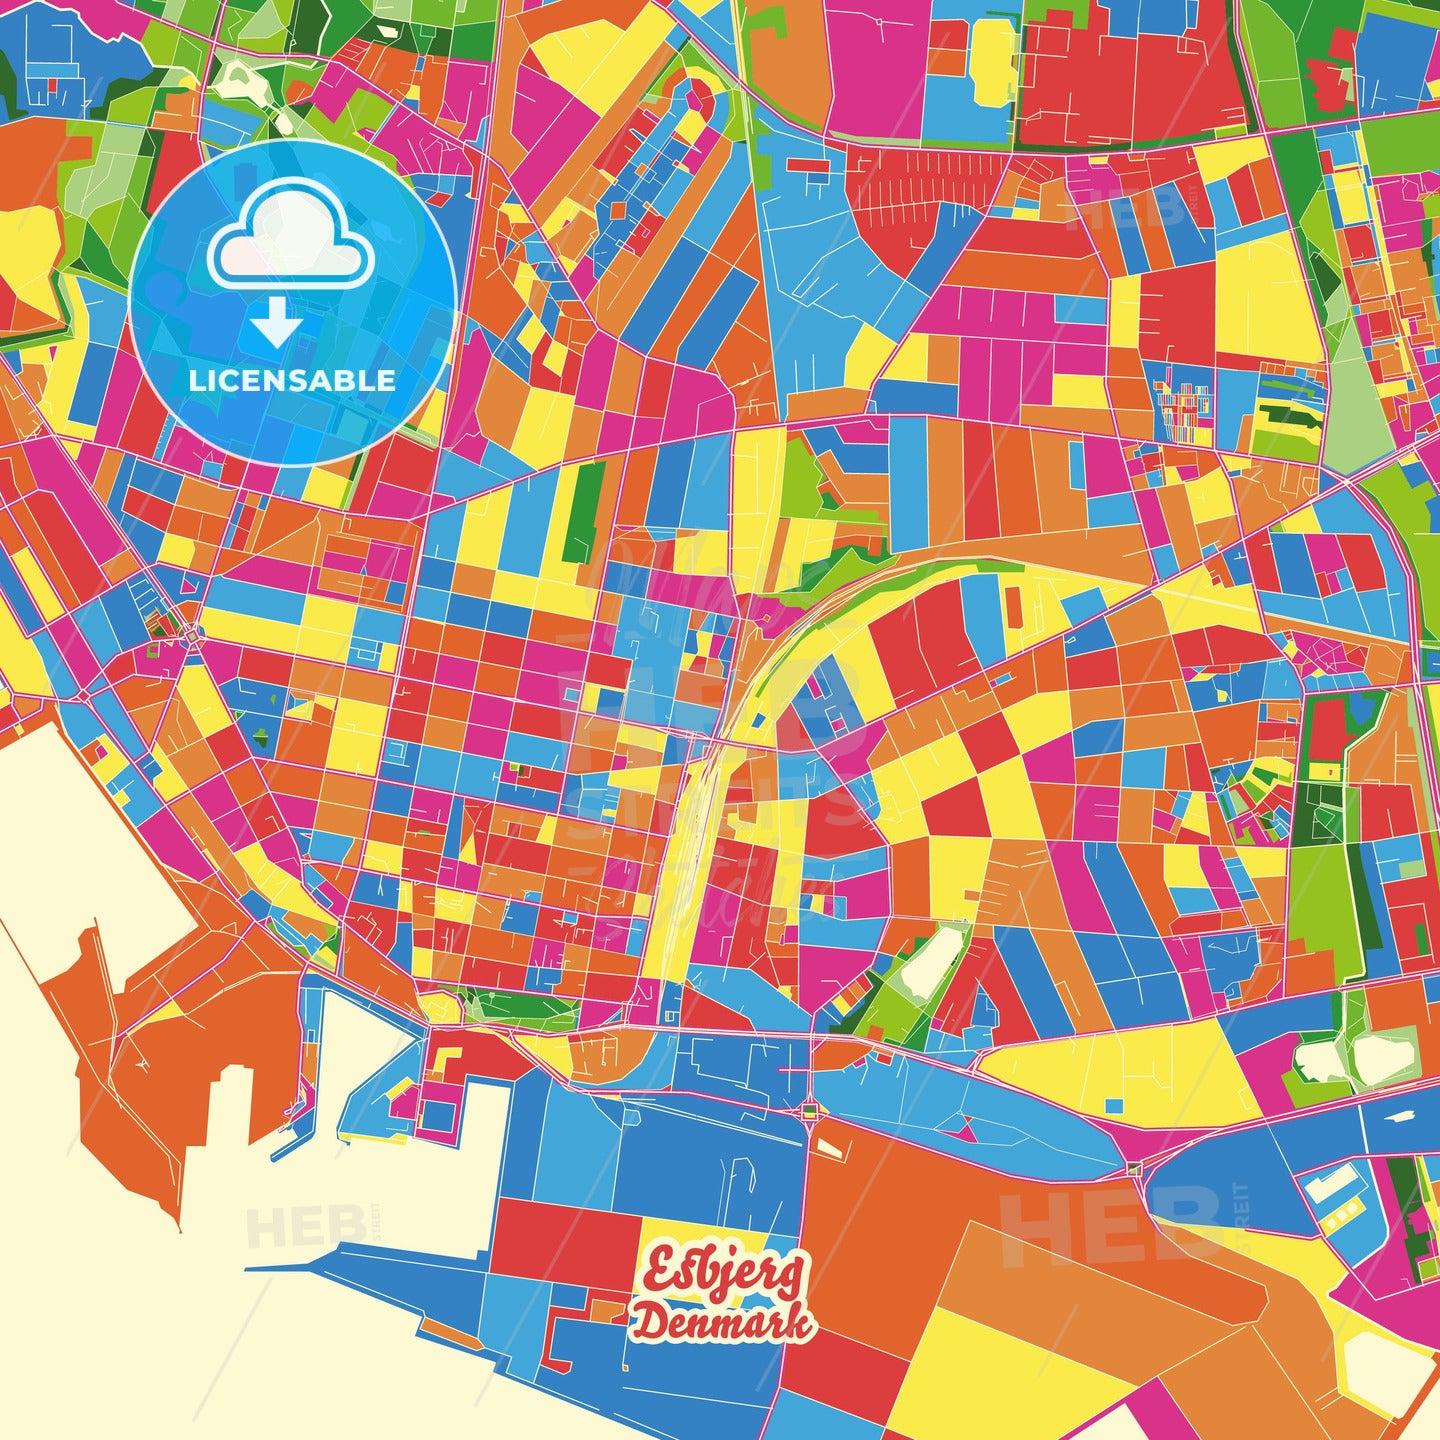 Esbjerg, Denmark Crazy Colorful Street Map Poster Template - HEBSTREITS Sketches